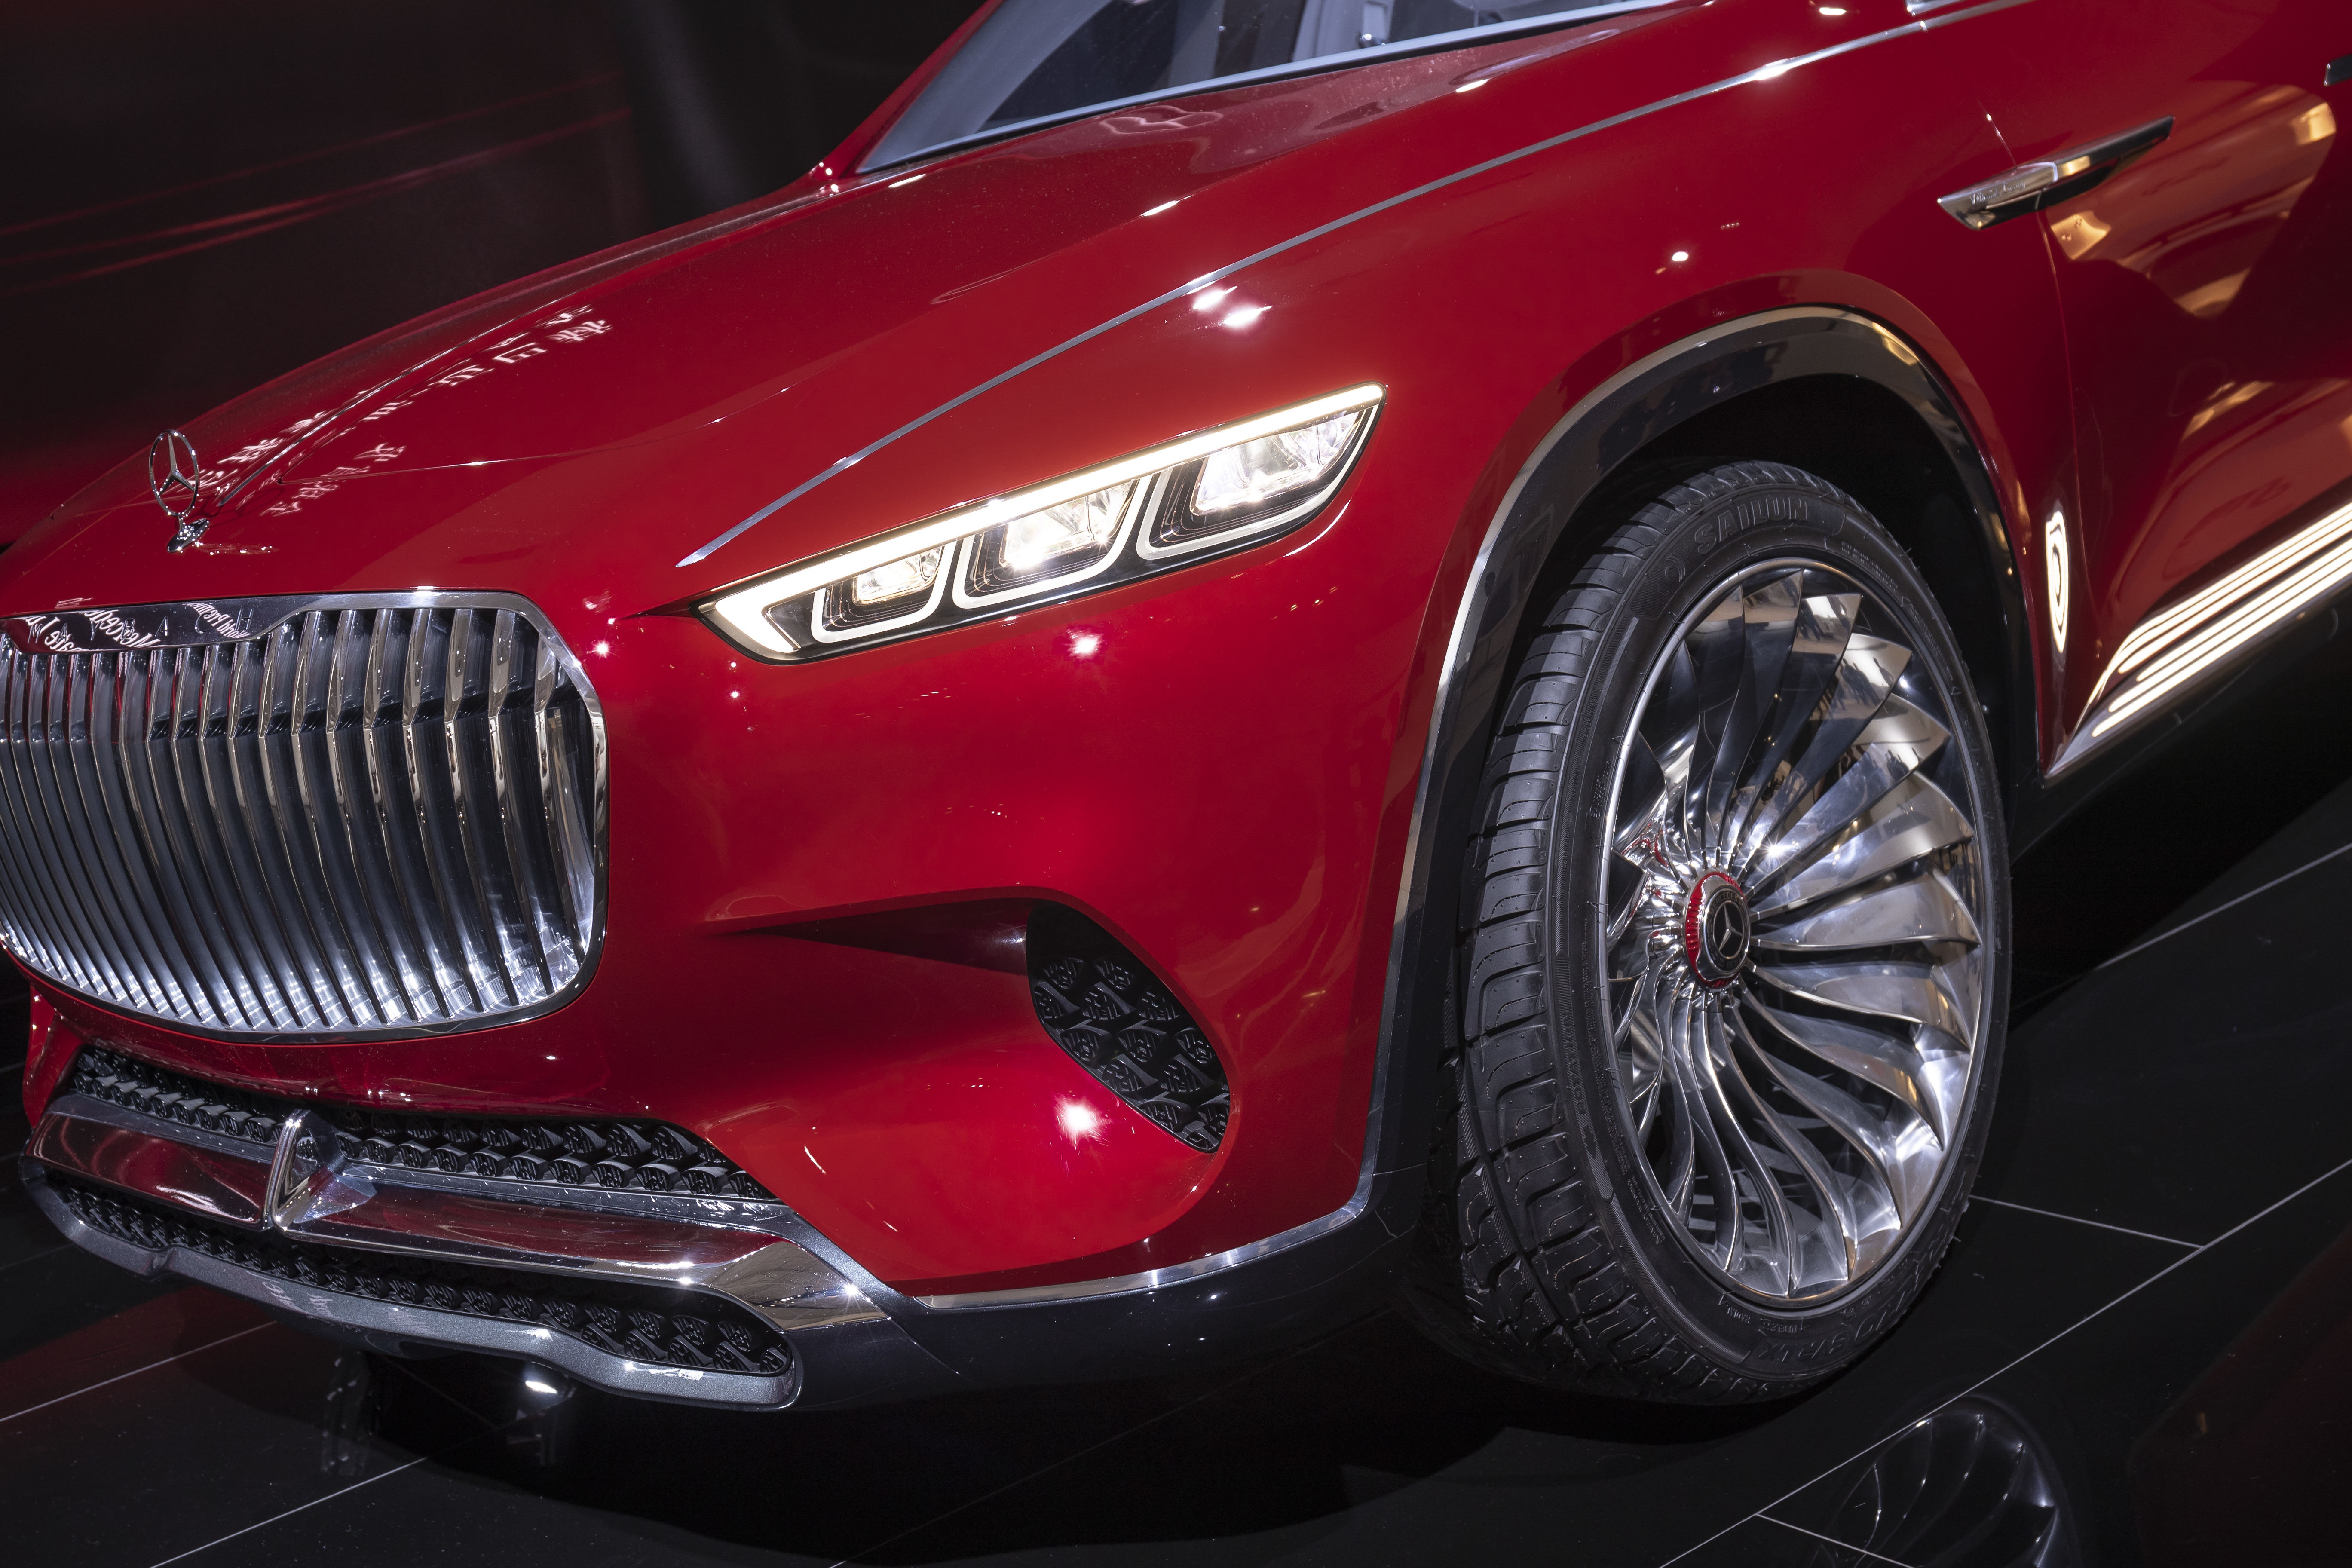 Maybach luxury. Mercedes-Maybach Vision Ultimate. Мерседес Майбах ультимейт лакшери. Mercedes Maybach Ultimate Luxury. Maybach Vision Ultimate Luxury.